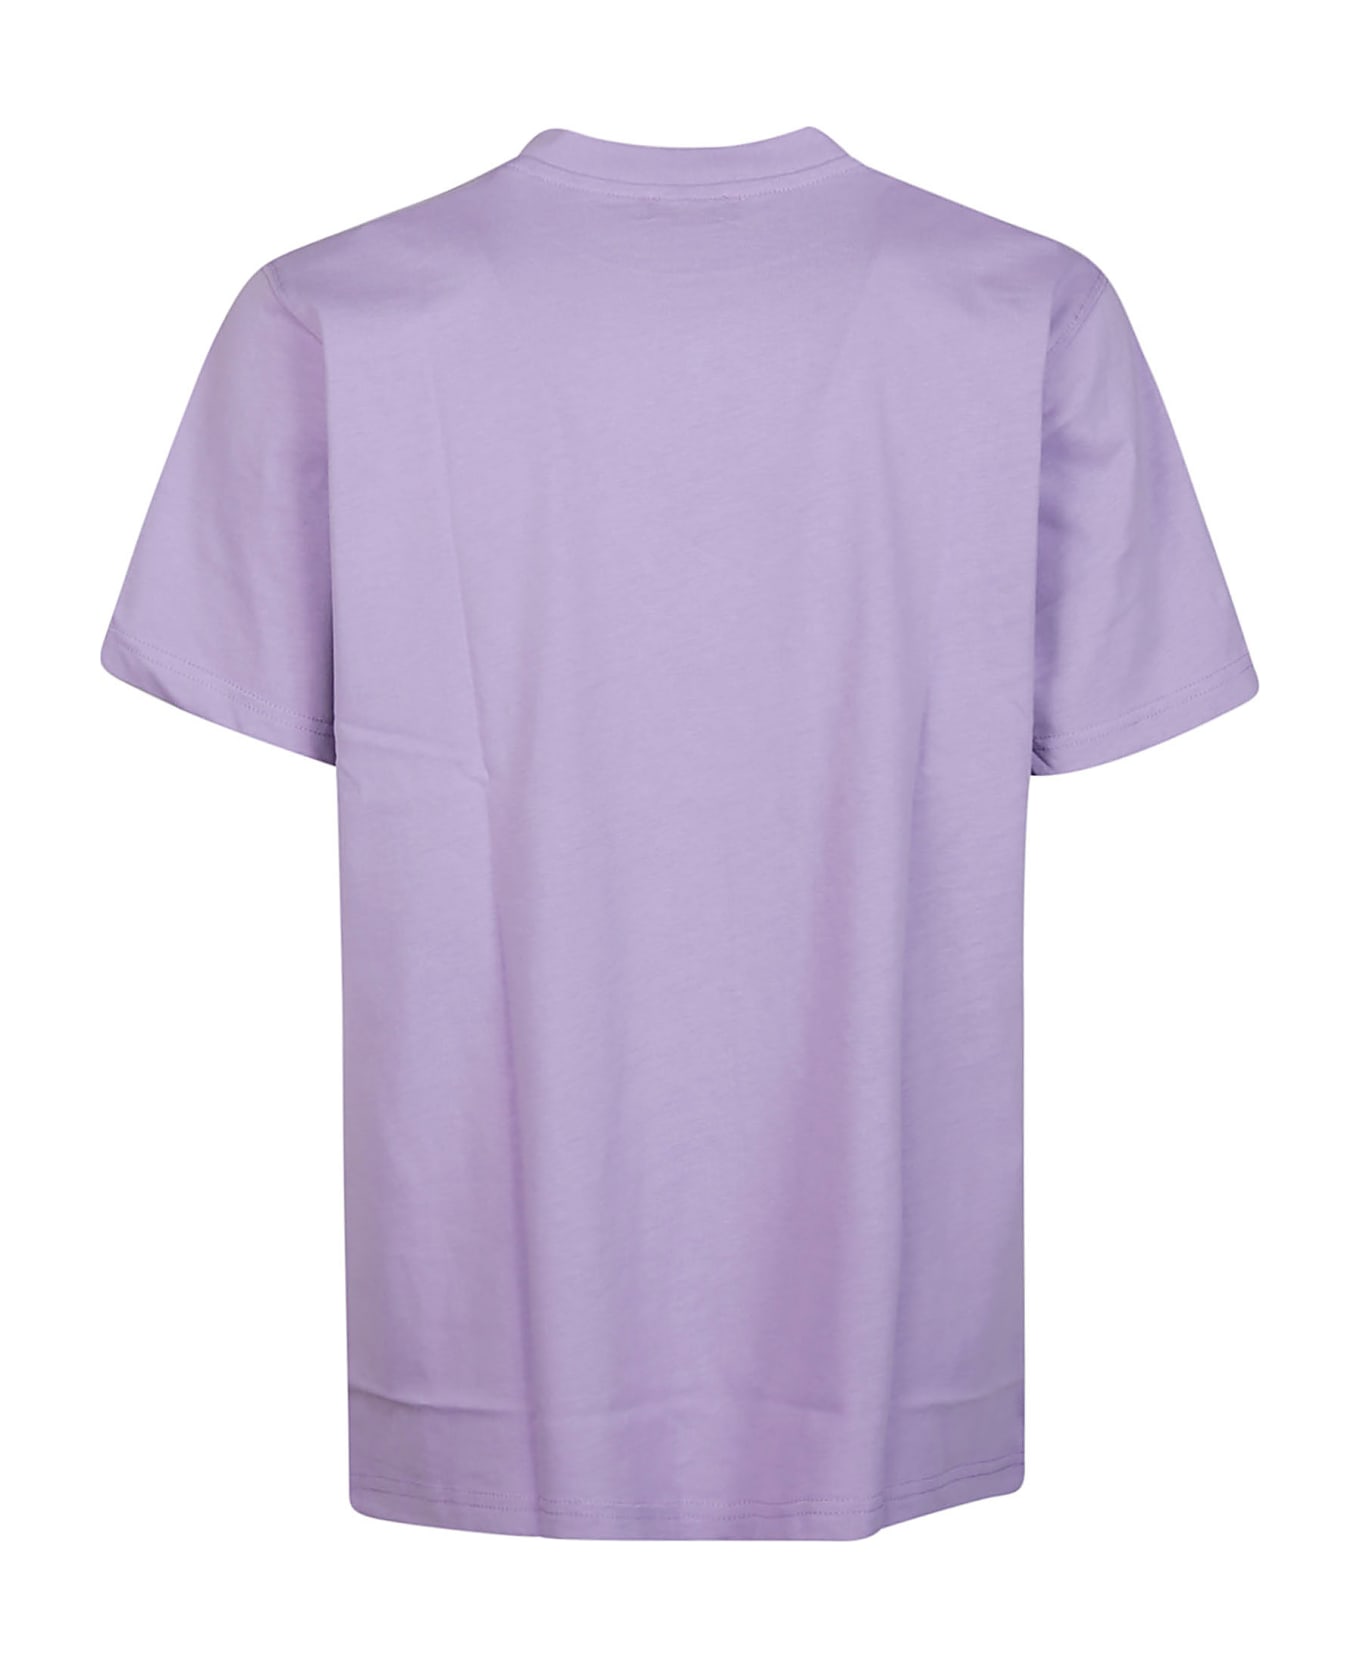 Family First Milano Symbol T-shirt - Violet